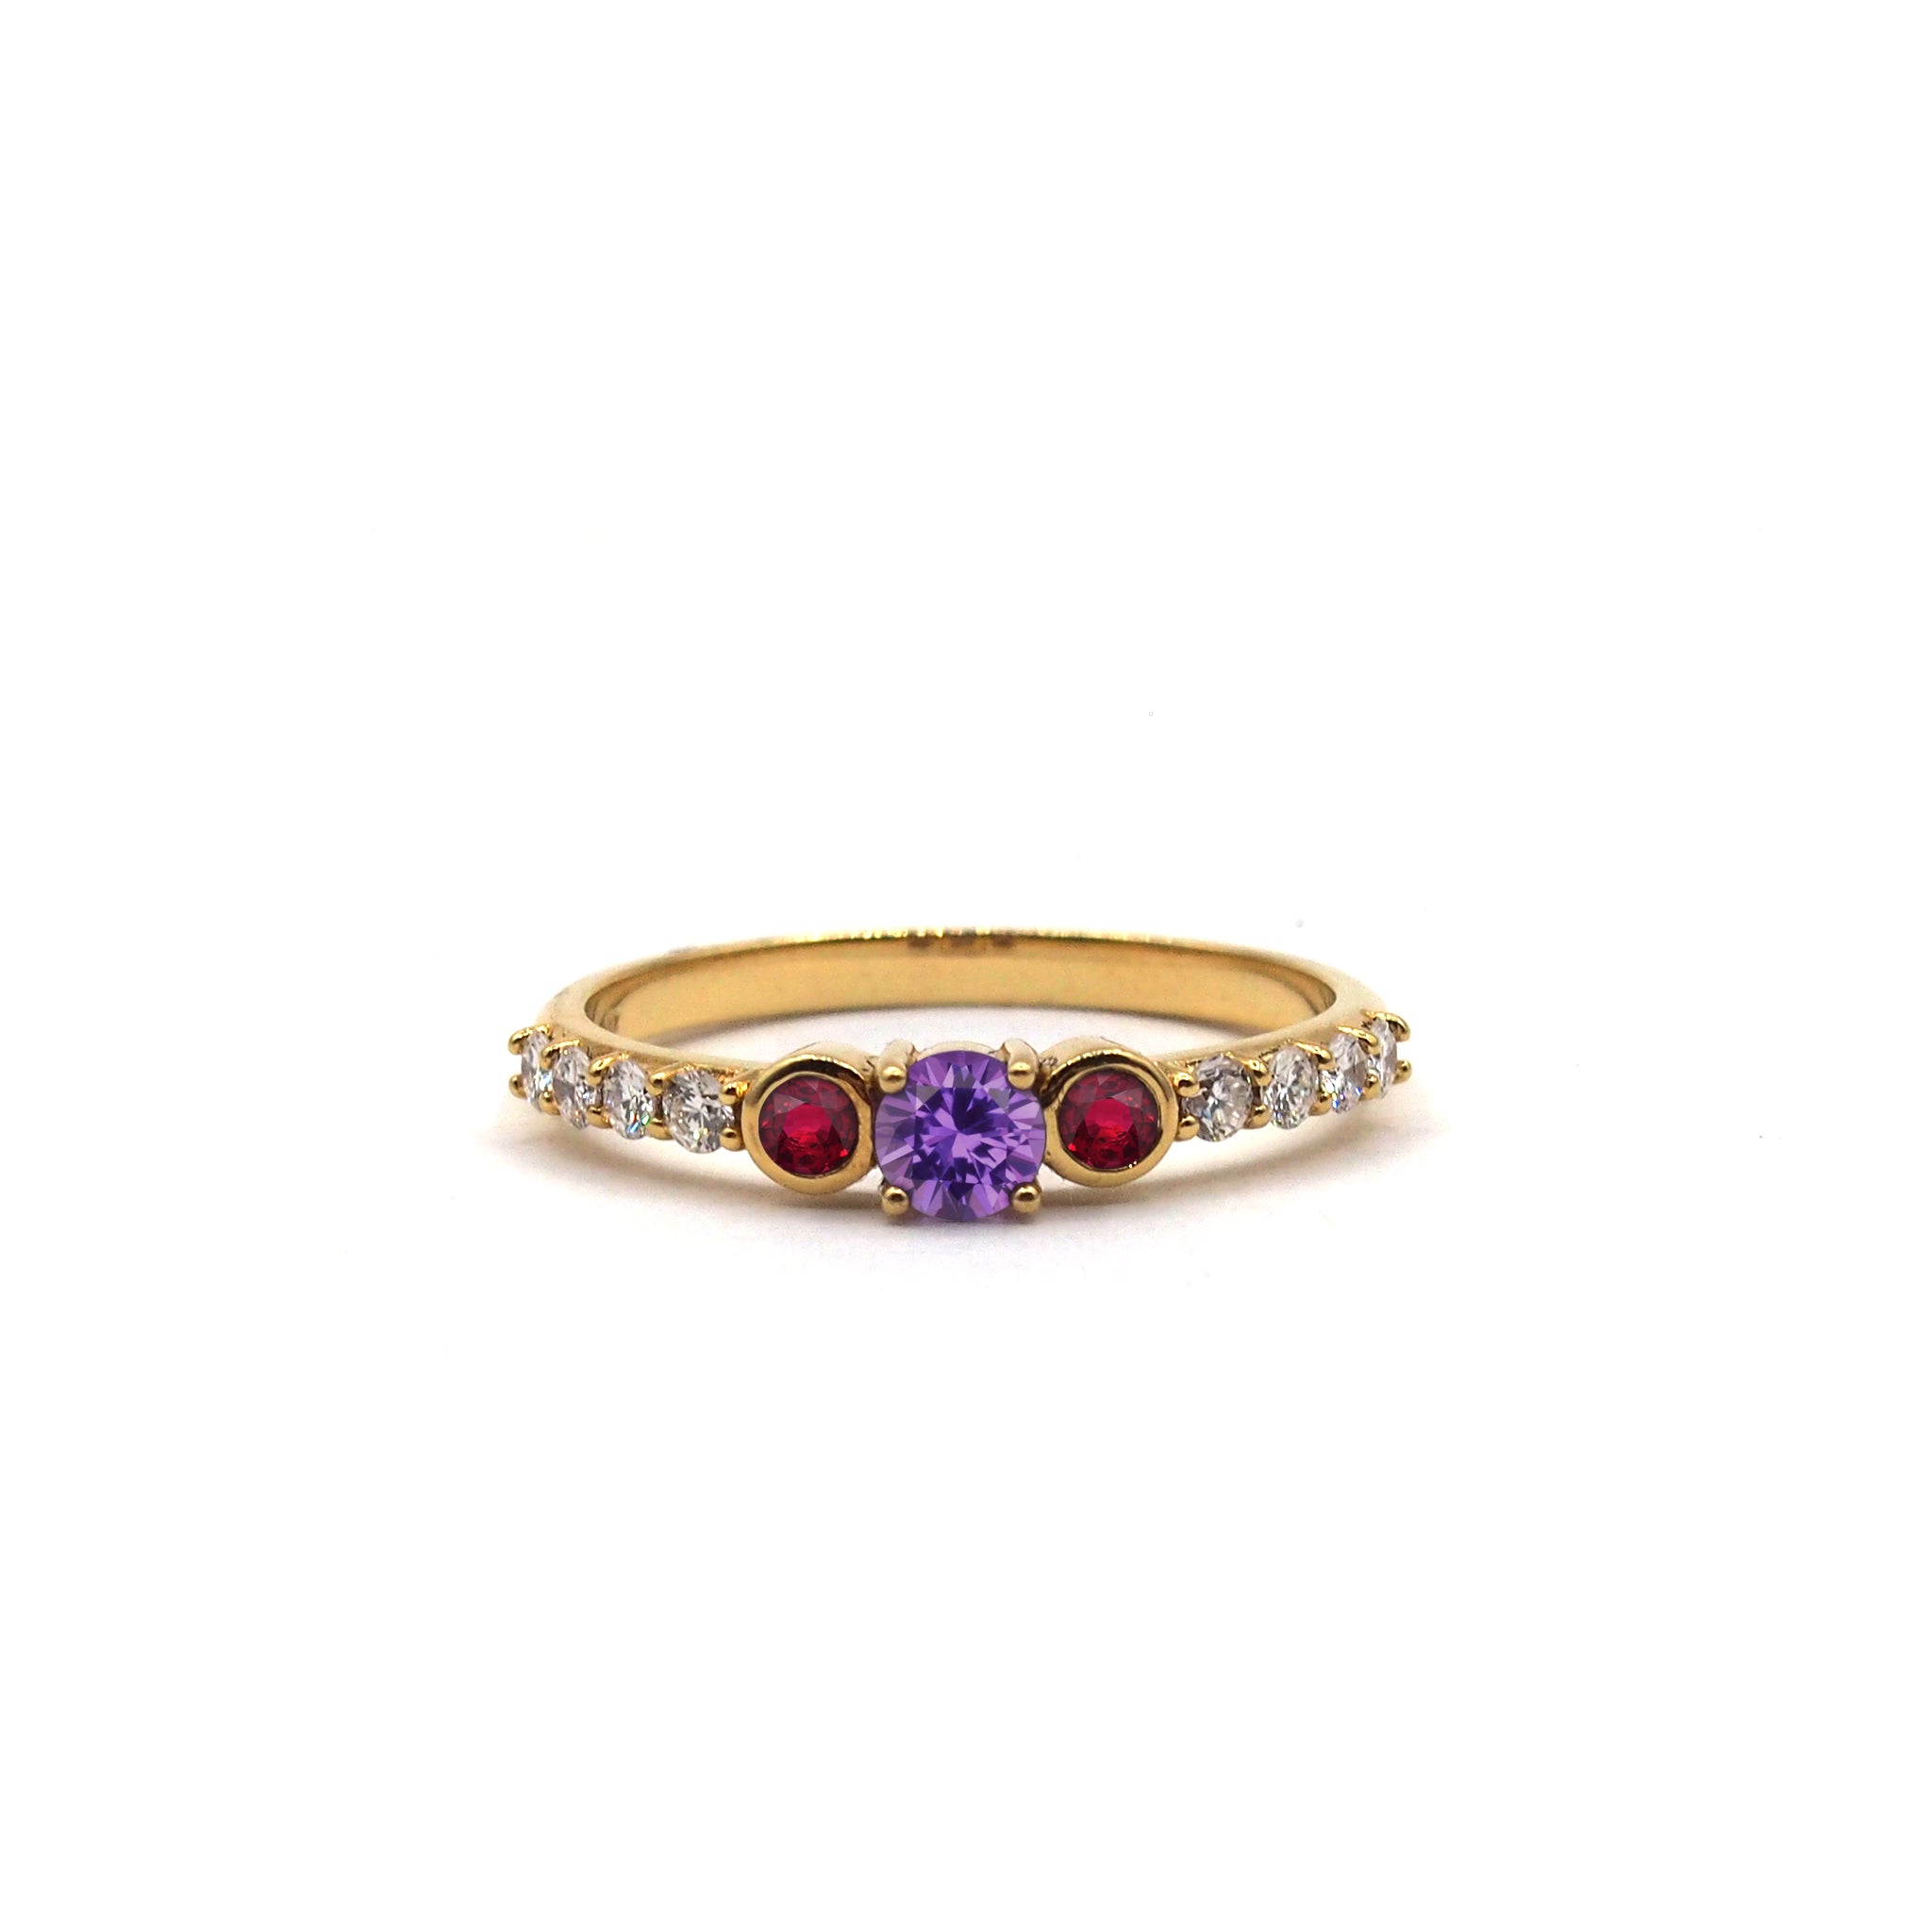 Sultan Ring with Purple Sapphire, Ruby, and Diamonds set in 18k Yellow Gold on White Background - Lico Jewelry Montreal